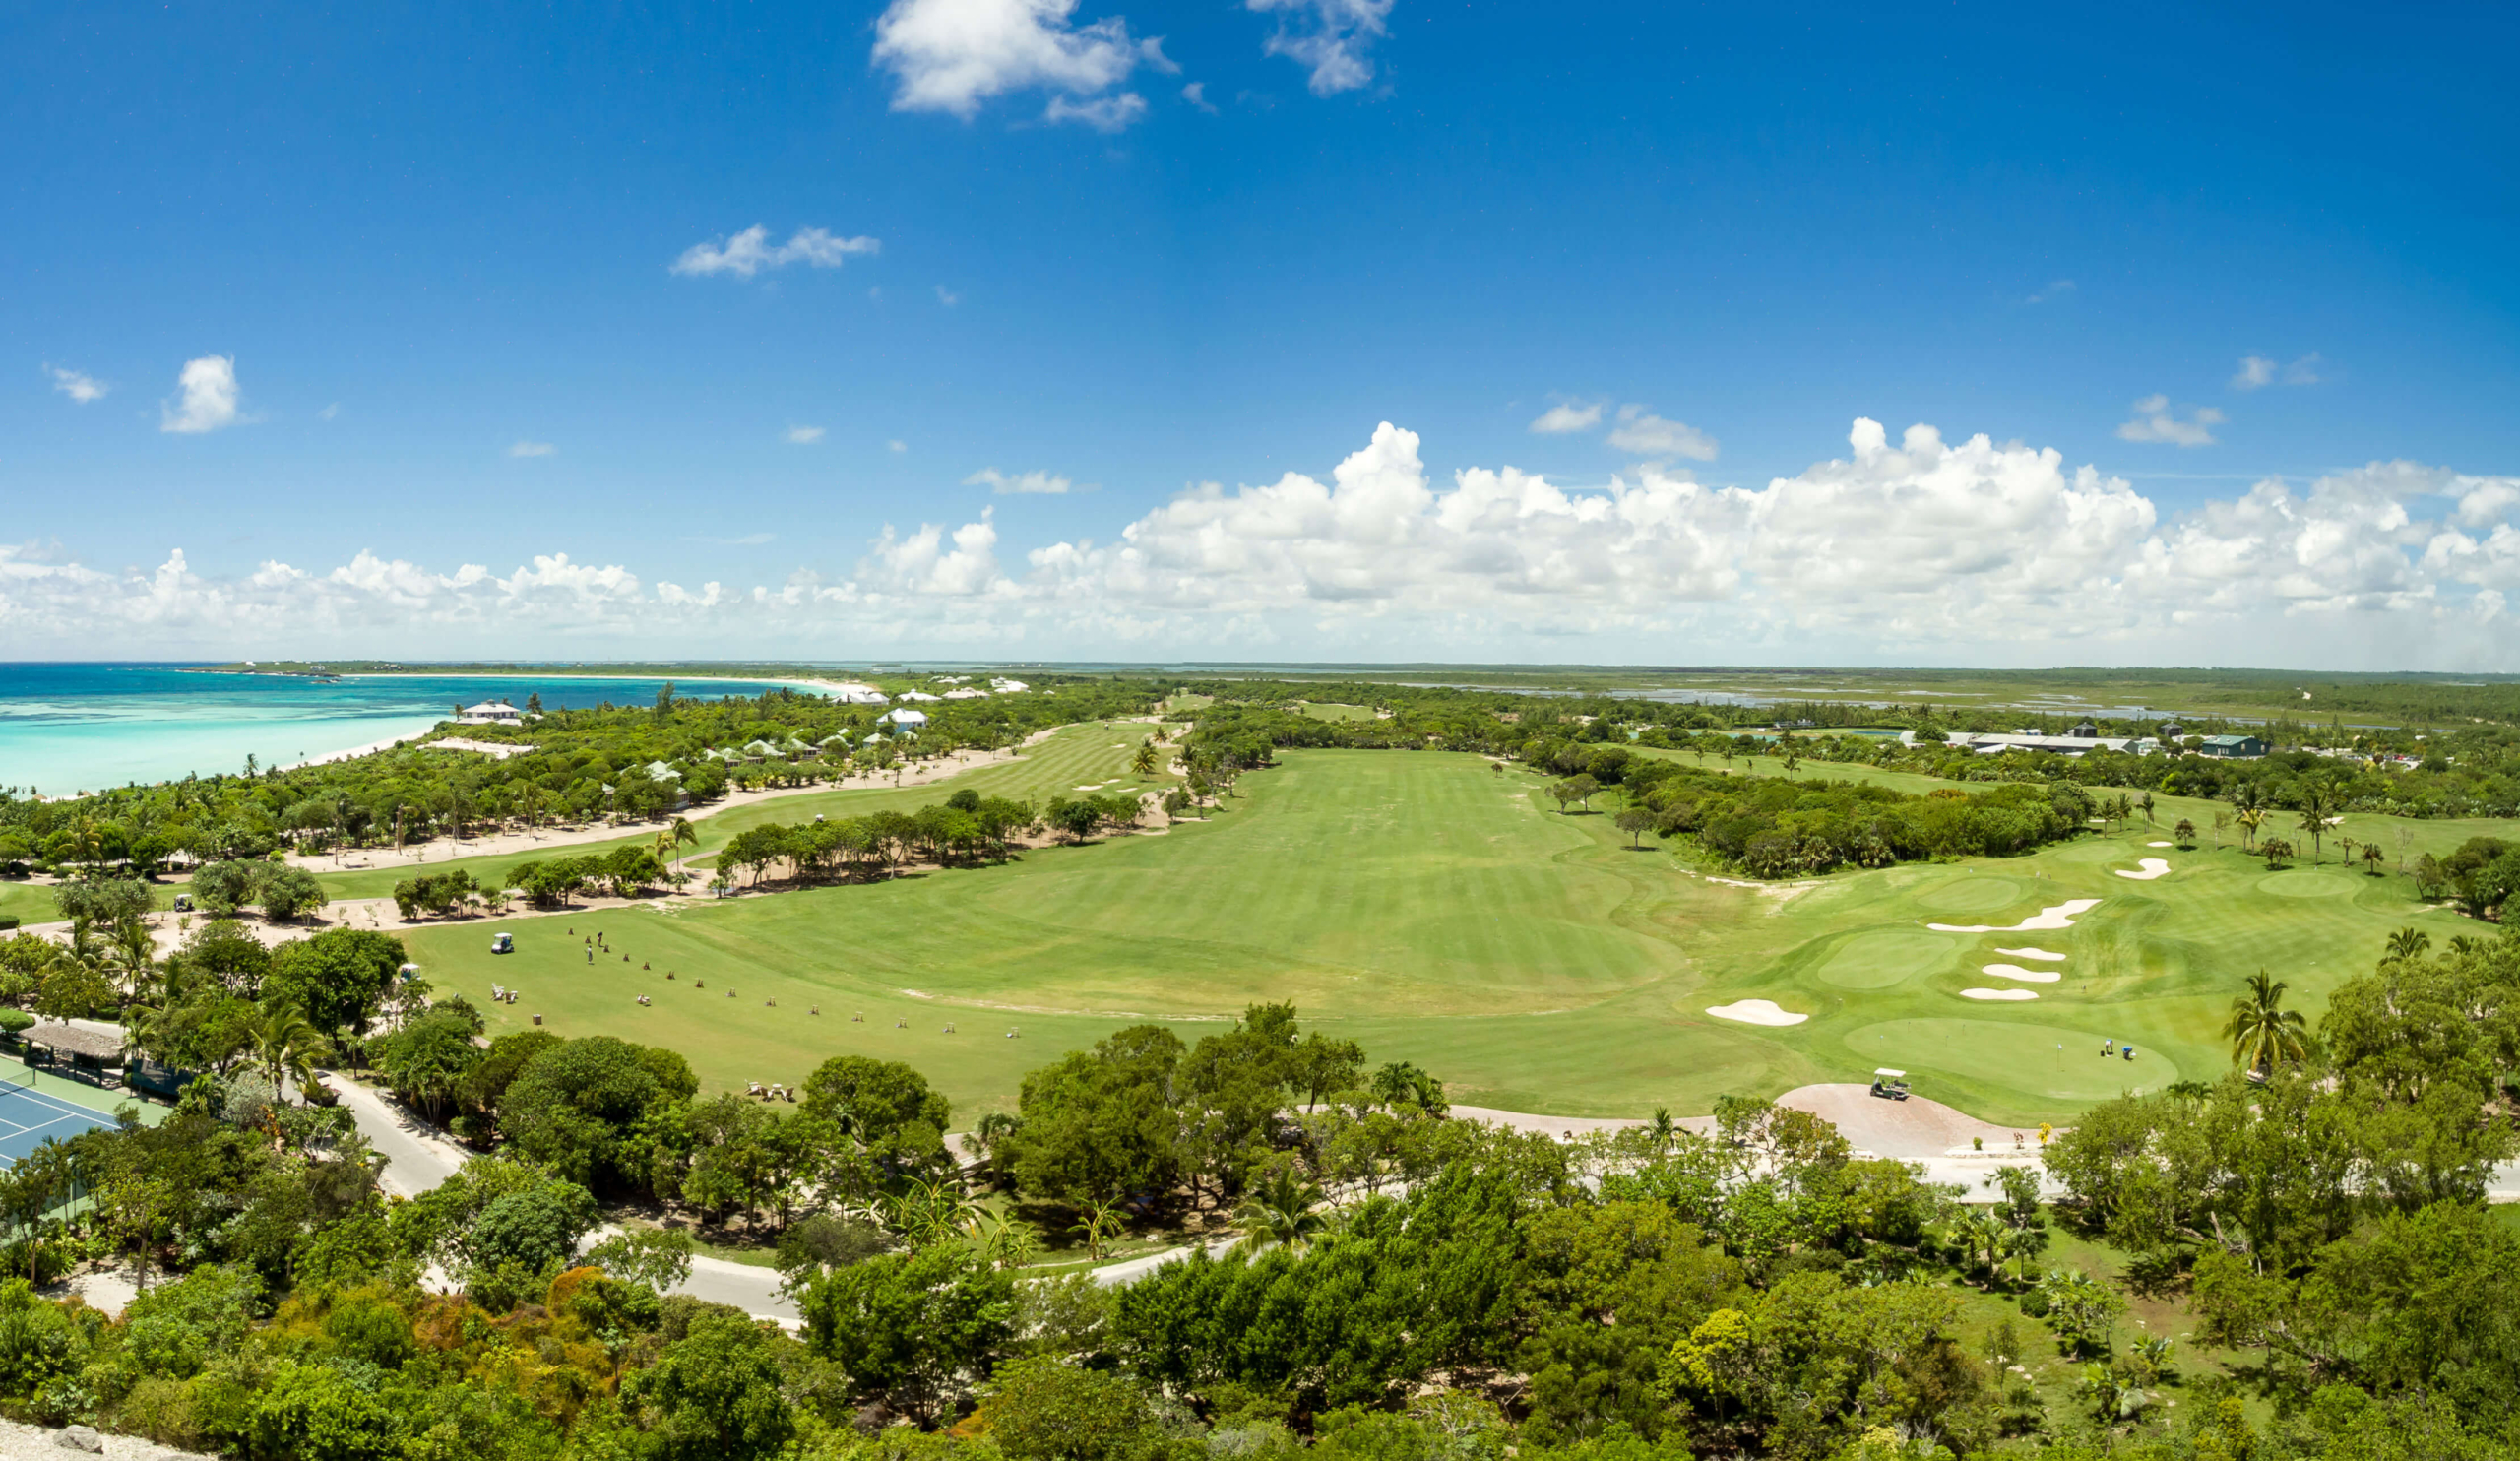 View of The Abaco Golf Course